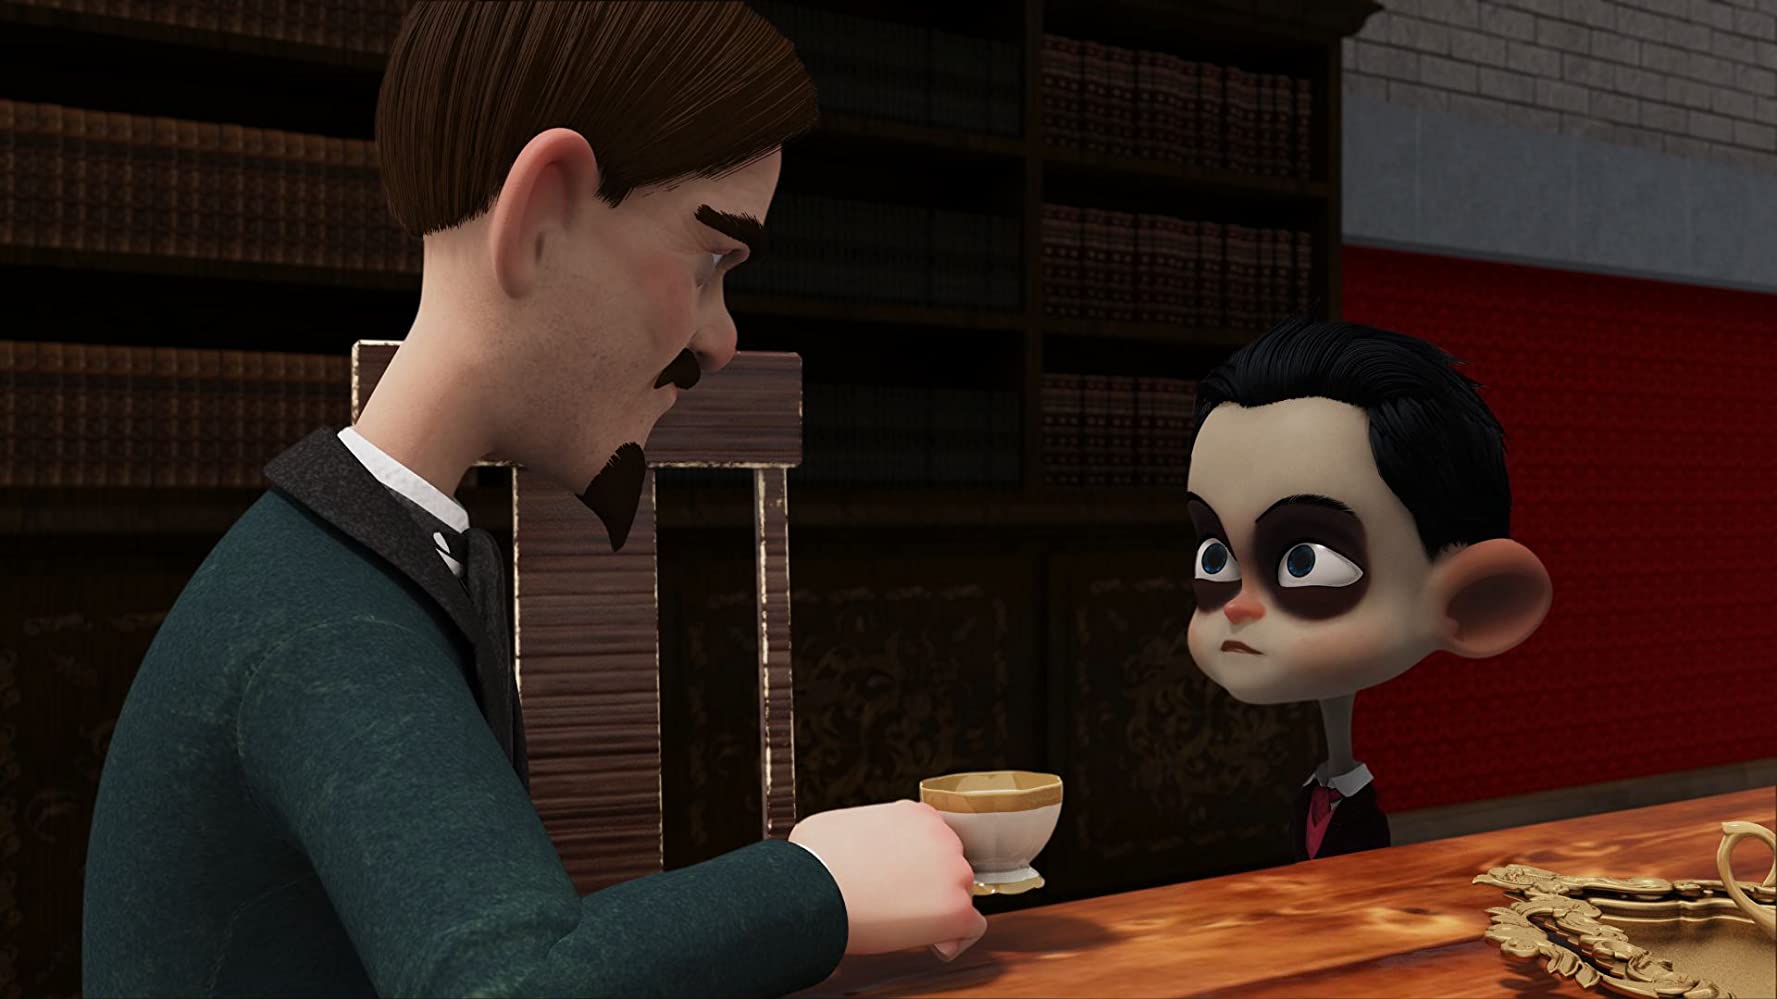 Dr Henry Armitage (voiced by Mark Hamill) and young Howard Lovecraft (voiced by Kiefer O’Reilly) in Howard Lovecraft and the Undersea Kingdom (2017)